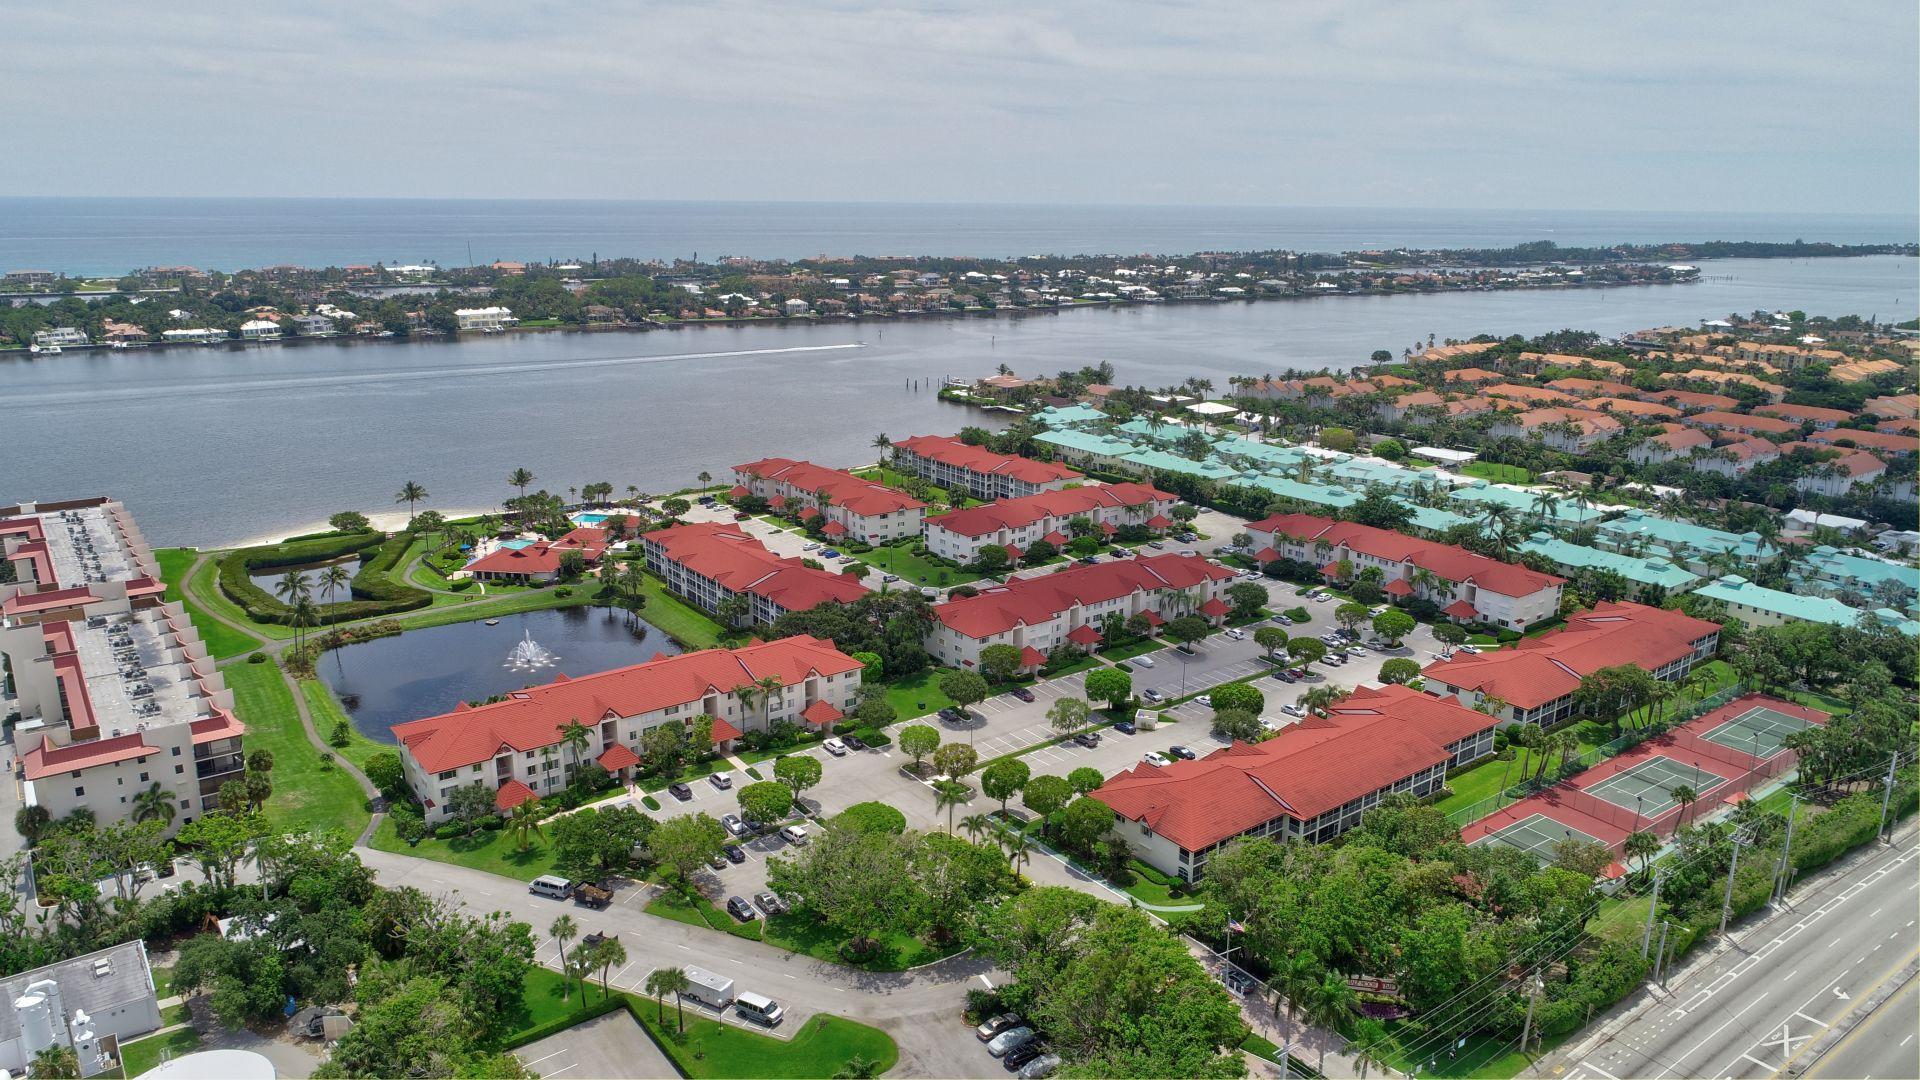 an aerial view of lake and residential houses with outdoor space